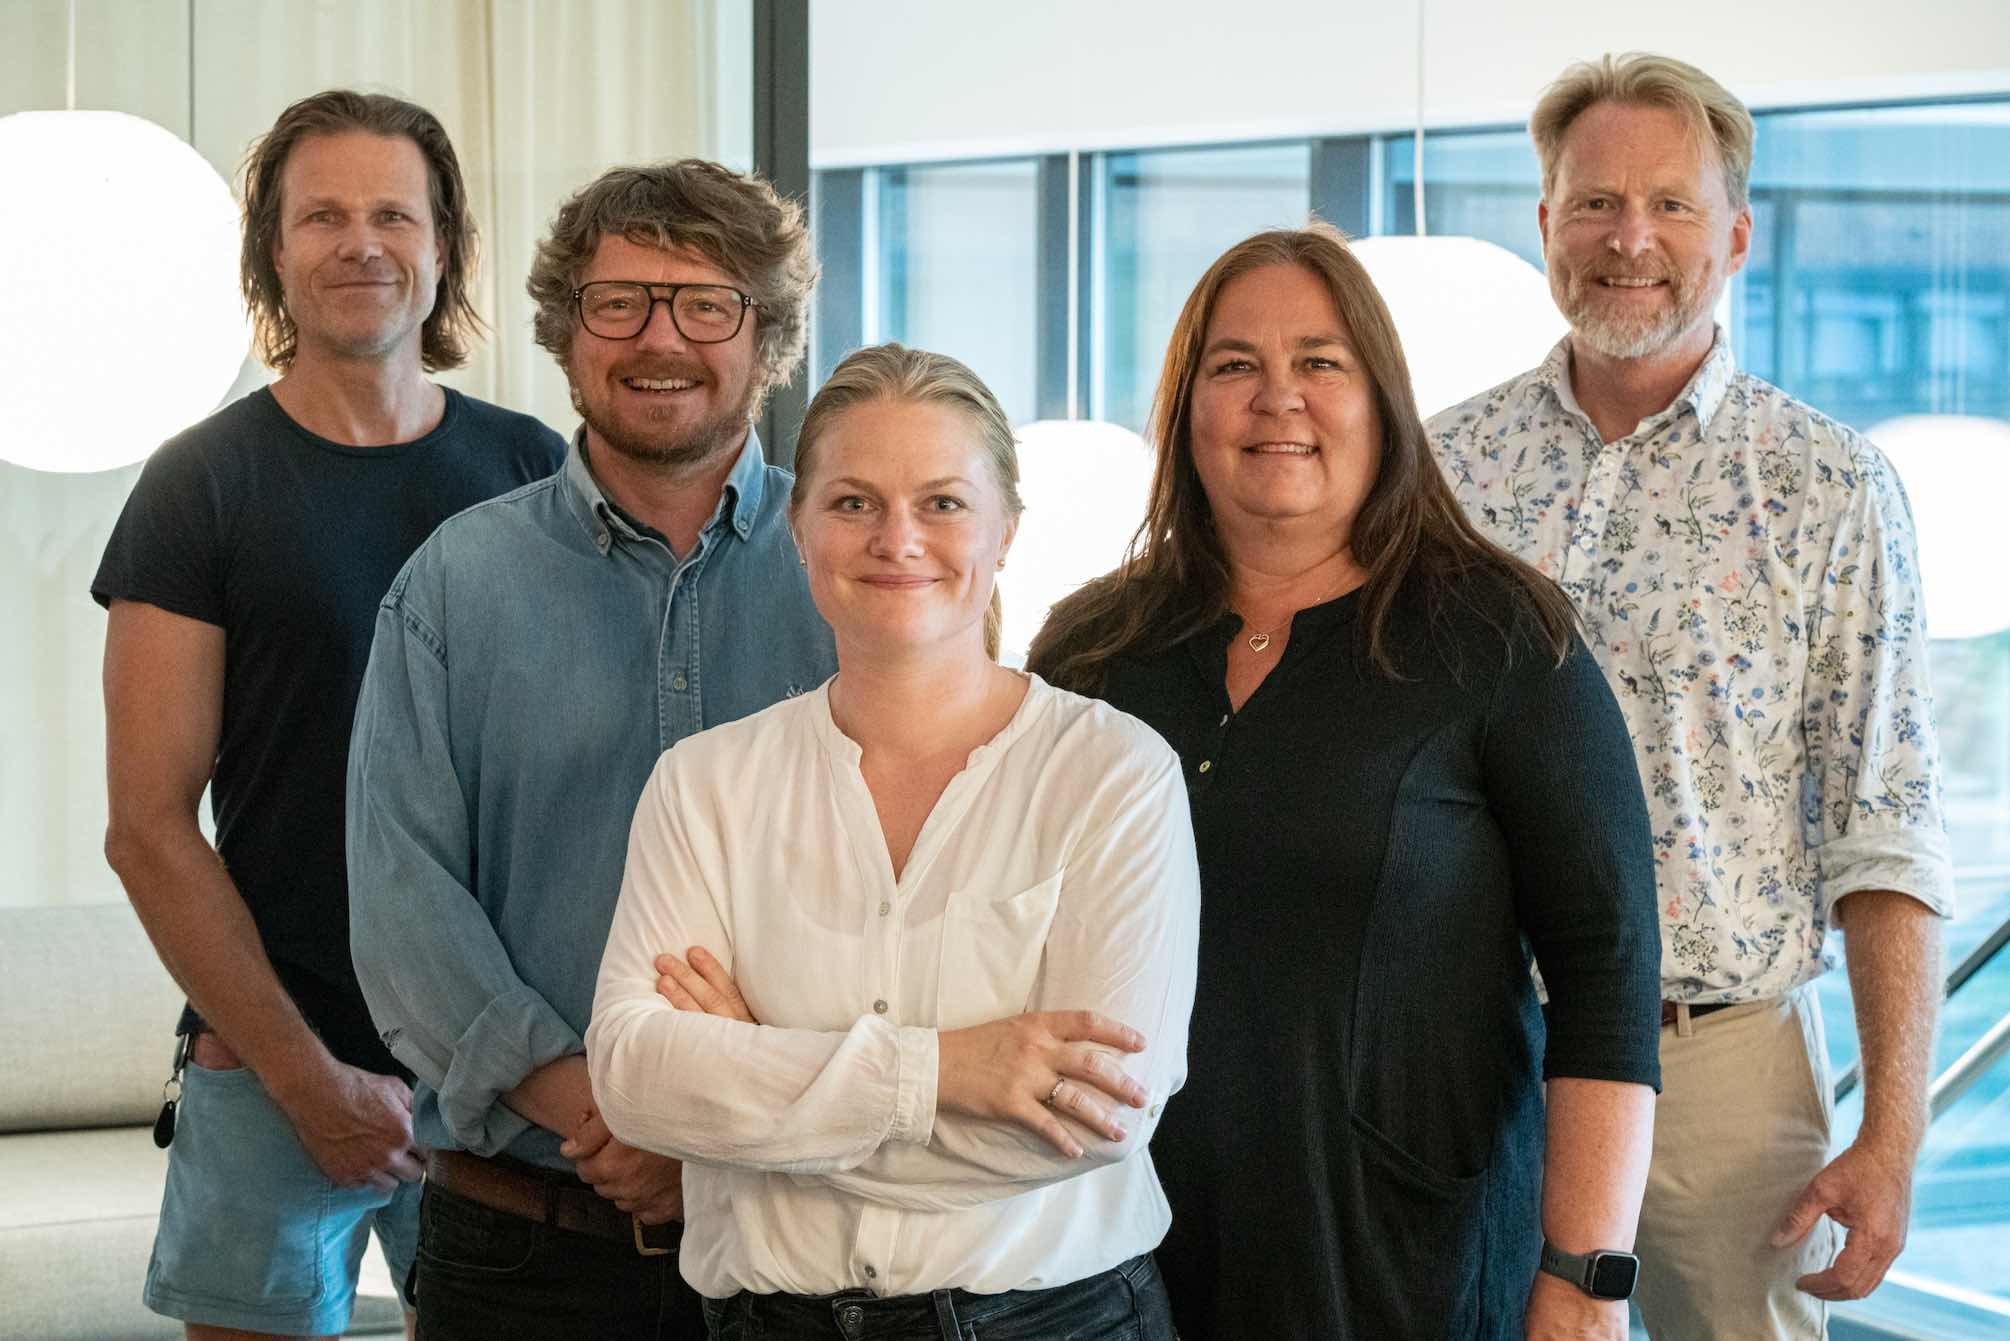 A group picture of the Hatteland Technology tunnel team. From the left: Kai Fossgård, Jan Olav Larssen, Mia Skrataas, Mette Janitz, and Morten Smestad. They're all smiling, facing the camera. 